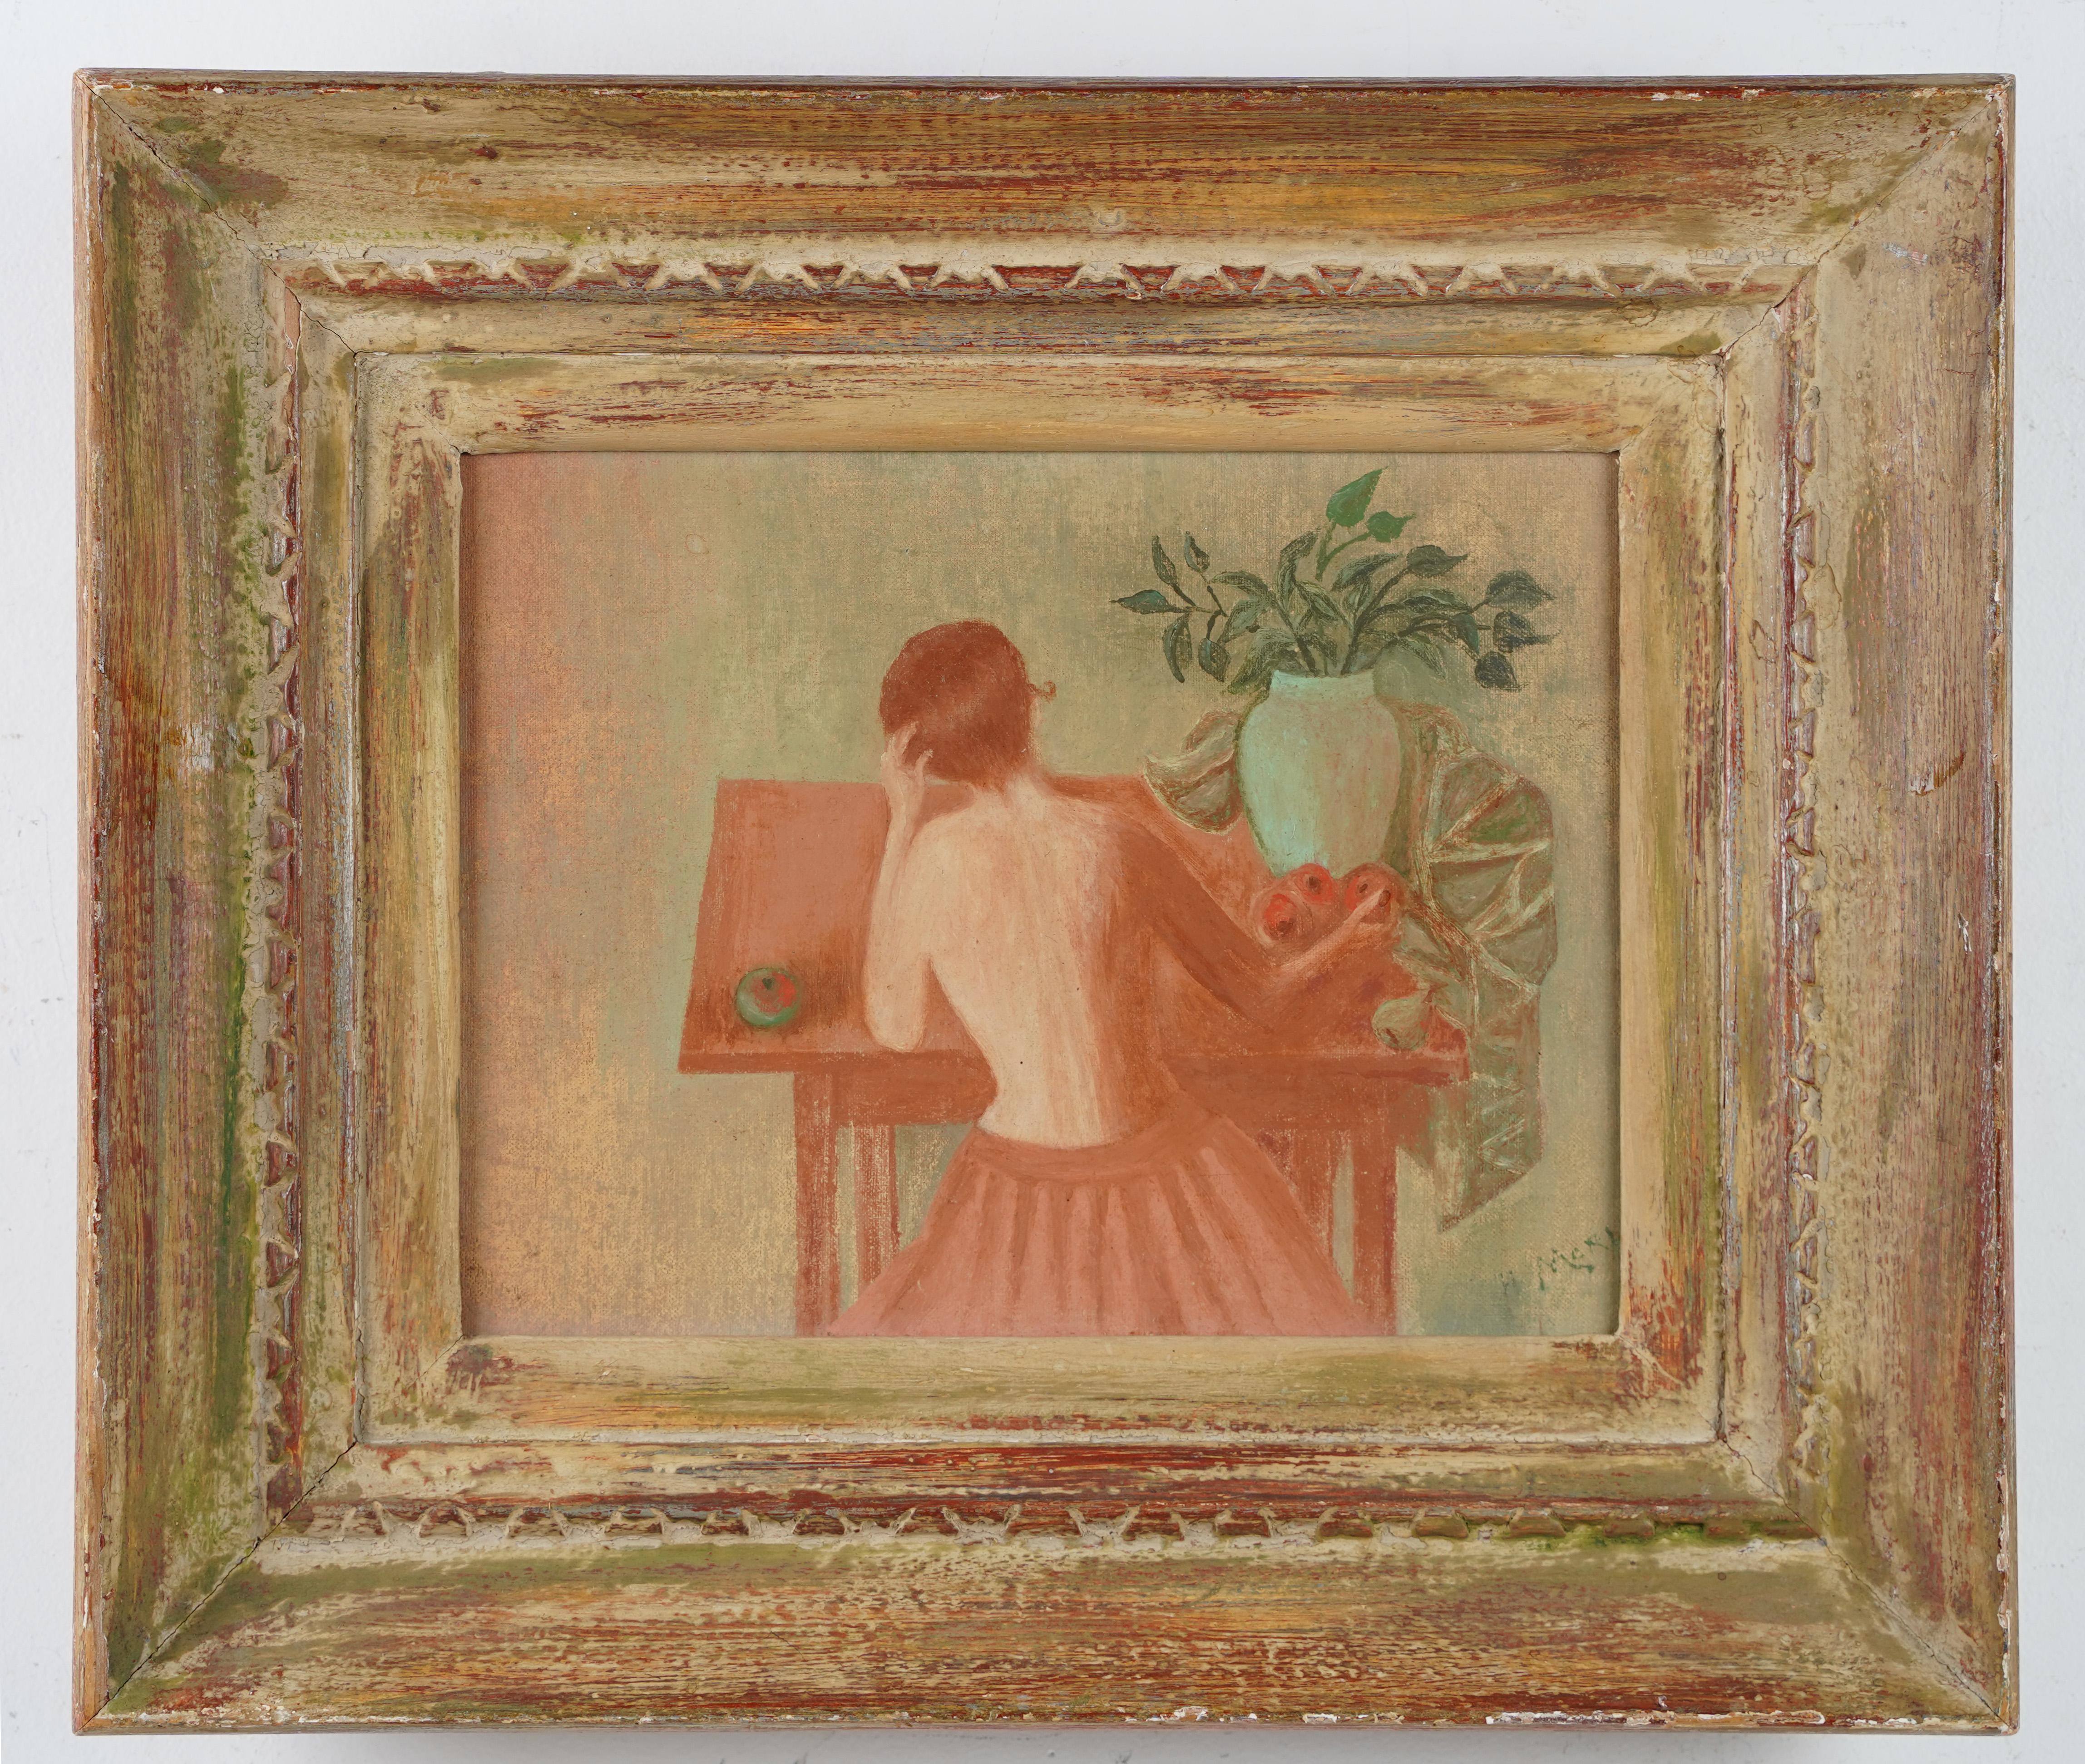 Antique American modernist interior view painting. Oil on canvas, circa 1940.  Housed in a vintage frame.   Image size, 13.25L x 10.25H. 
